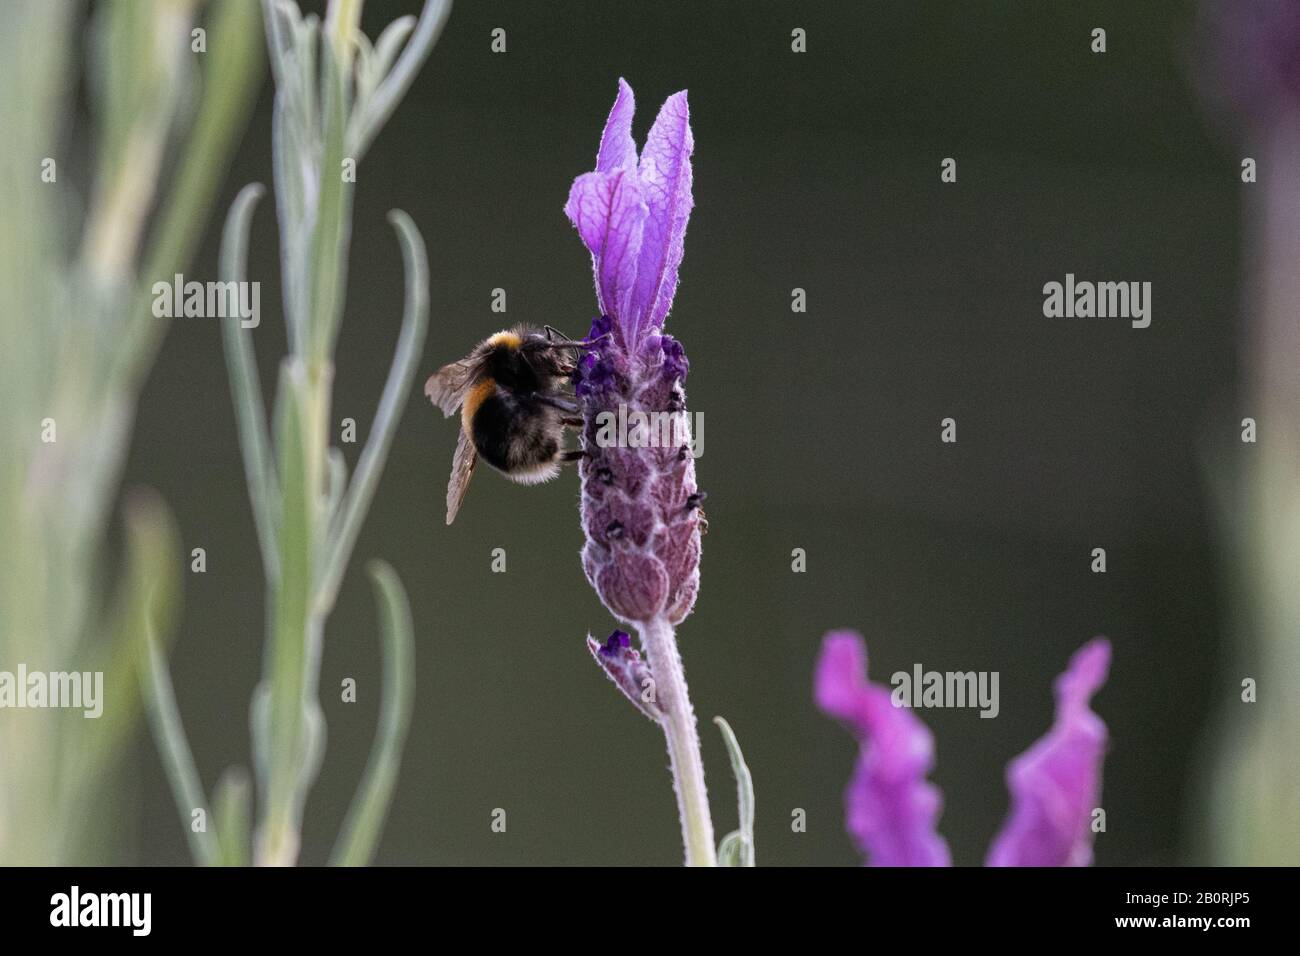 A bee perched on a vibrant purple lavender flower Stock Photo